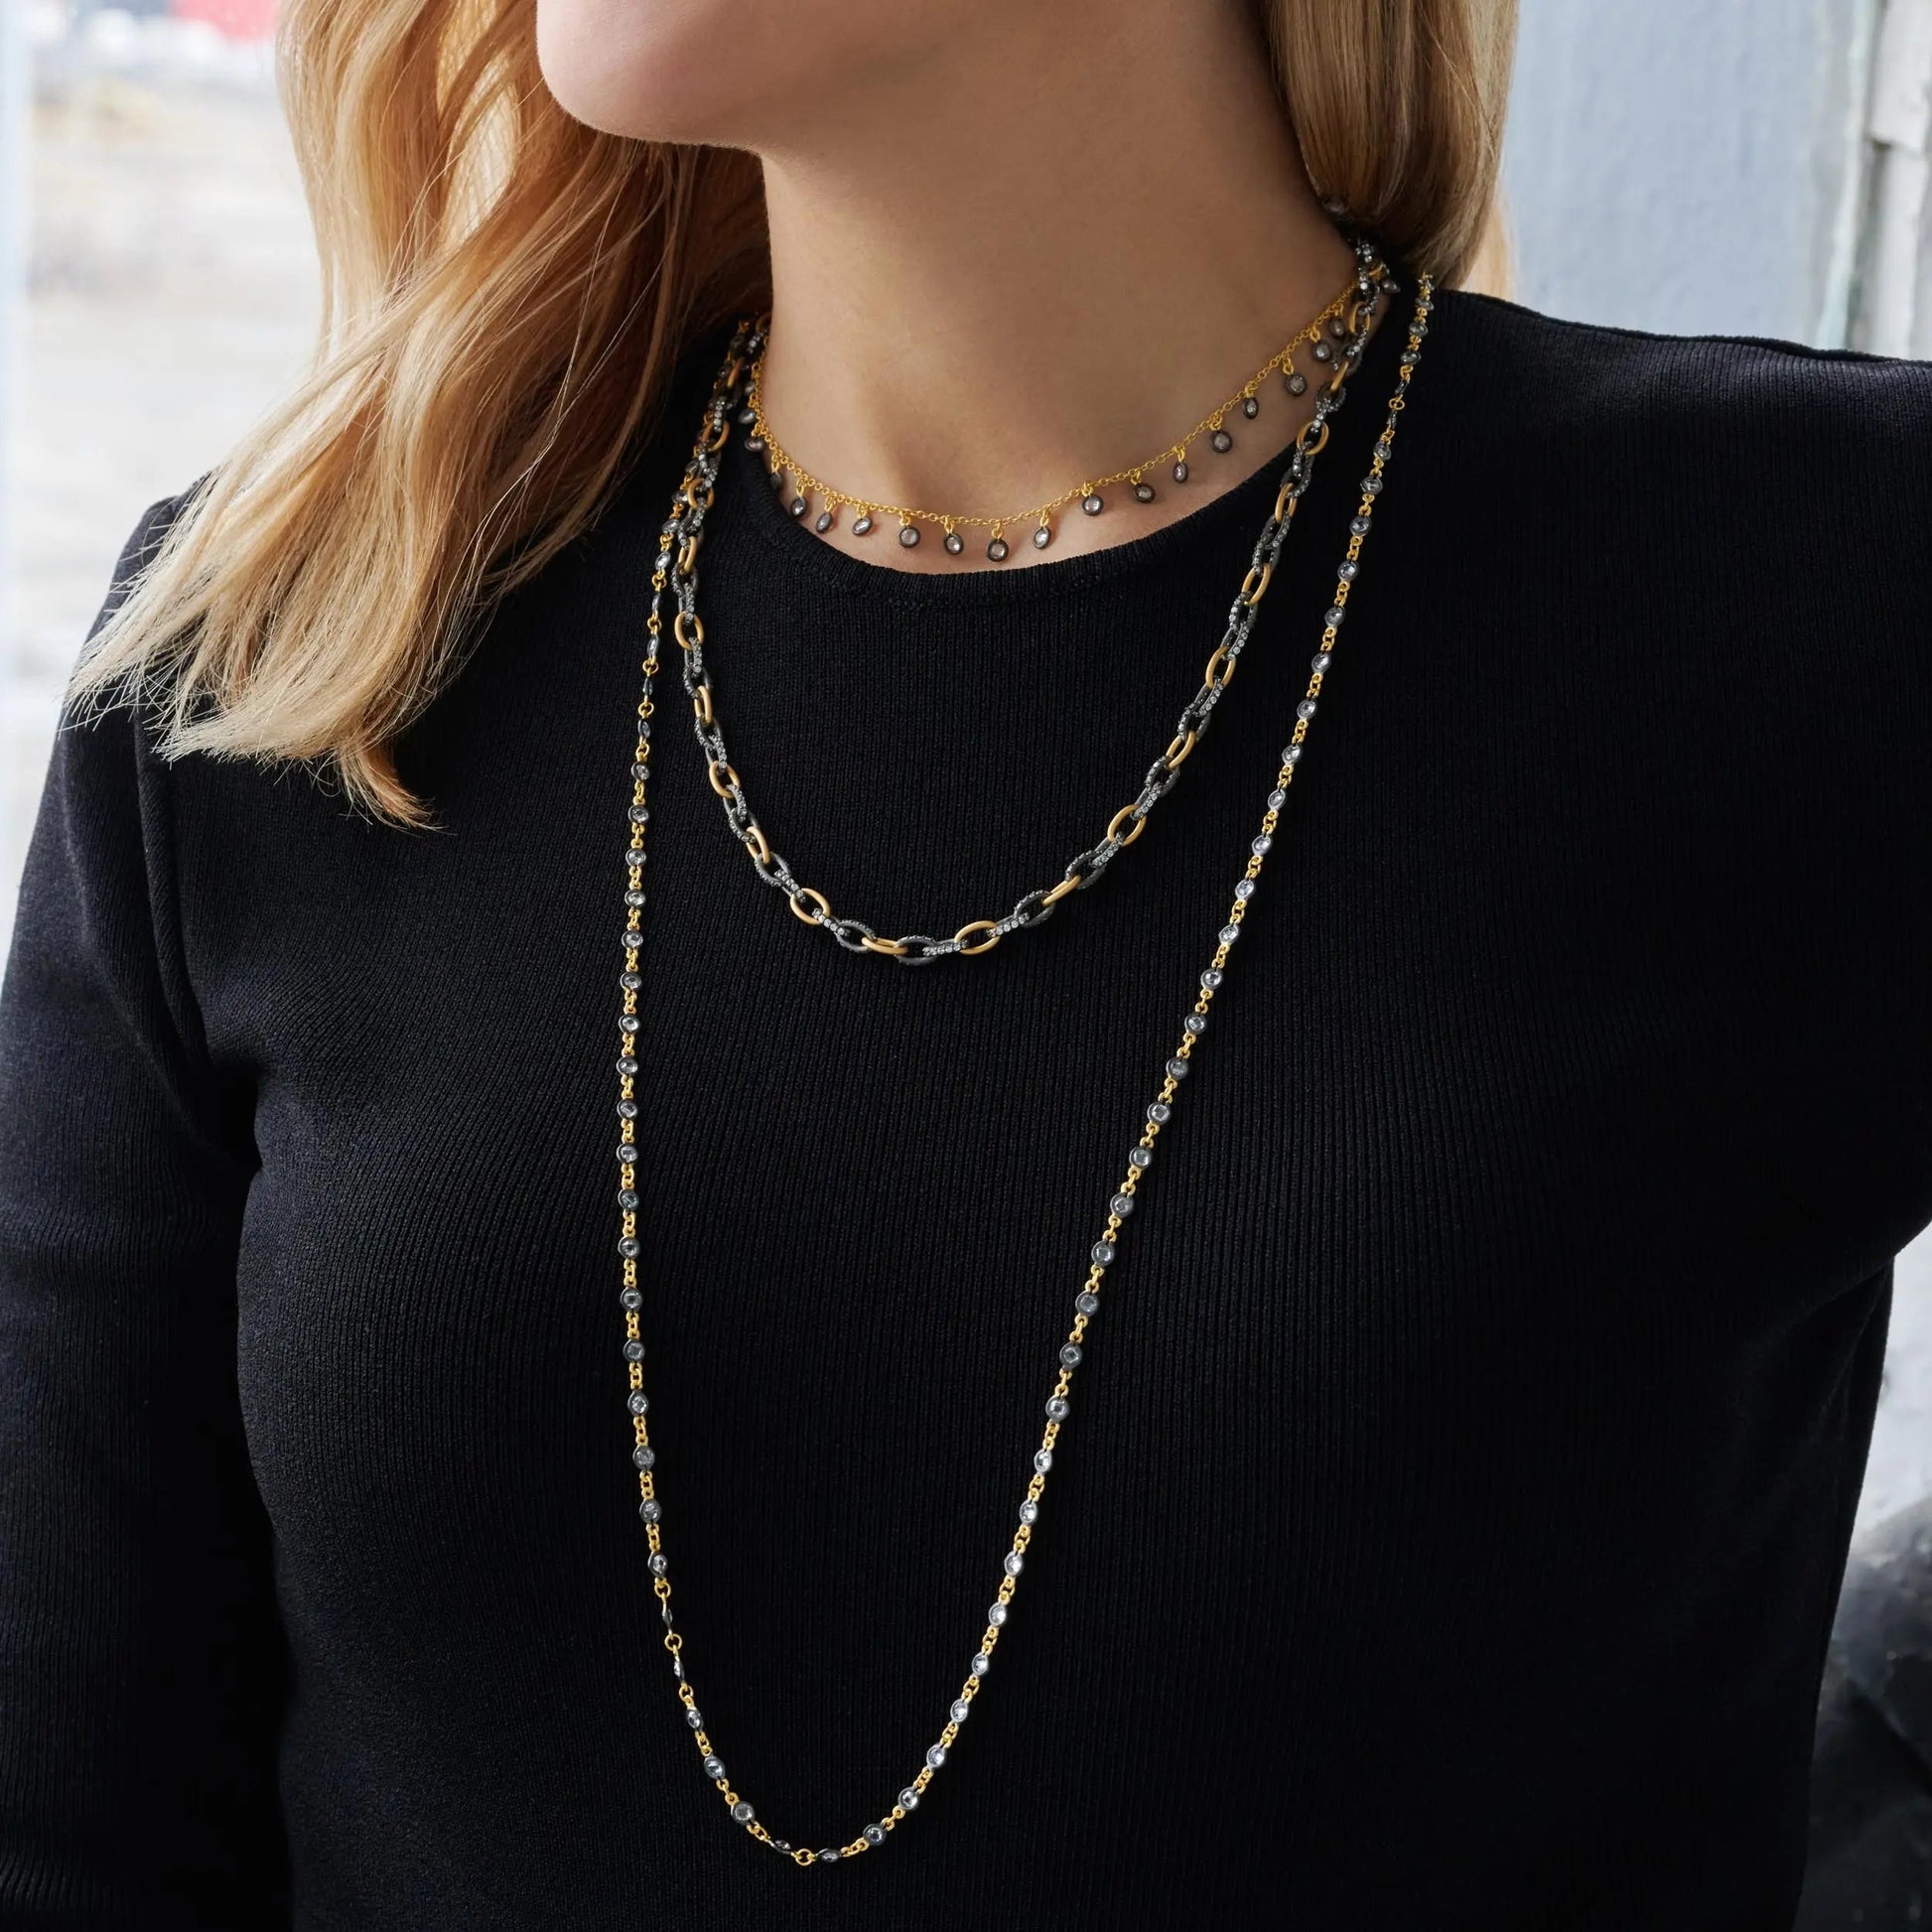  Iconic Chain Layers Shop the Look SHOP THE LOOK